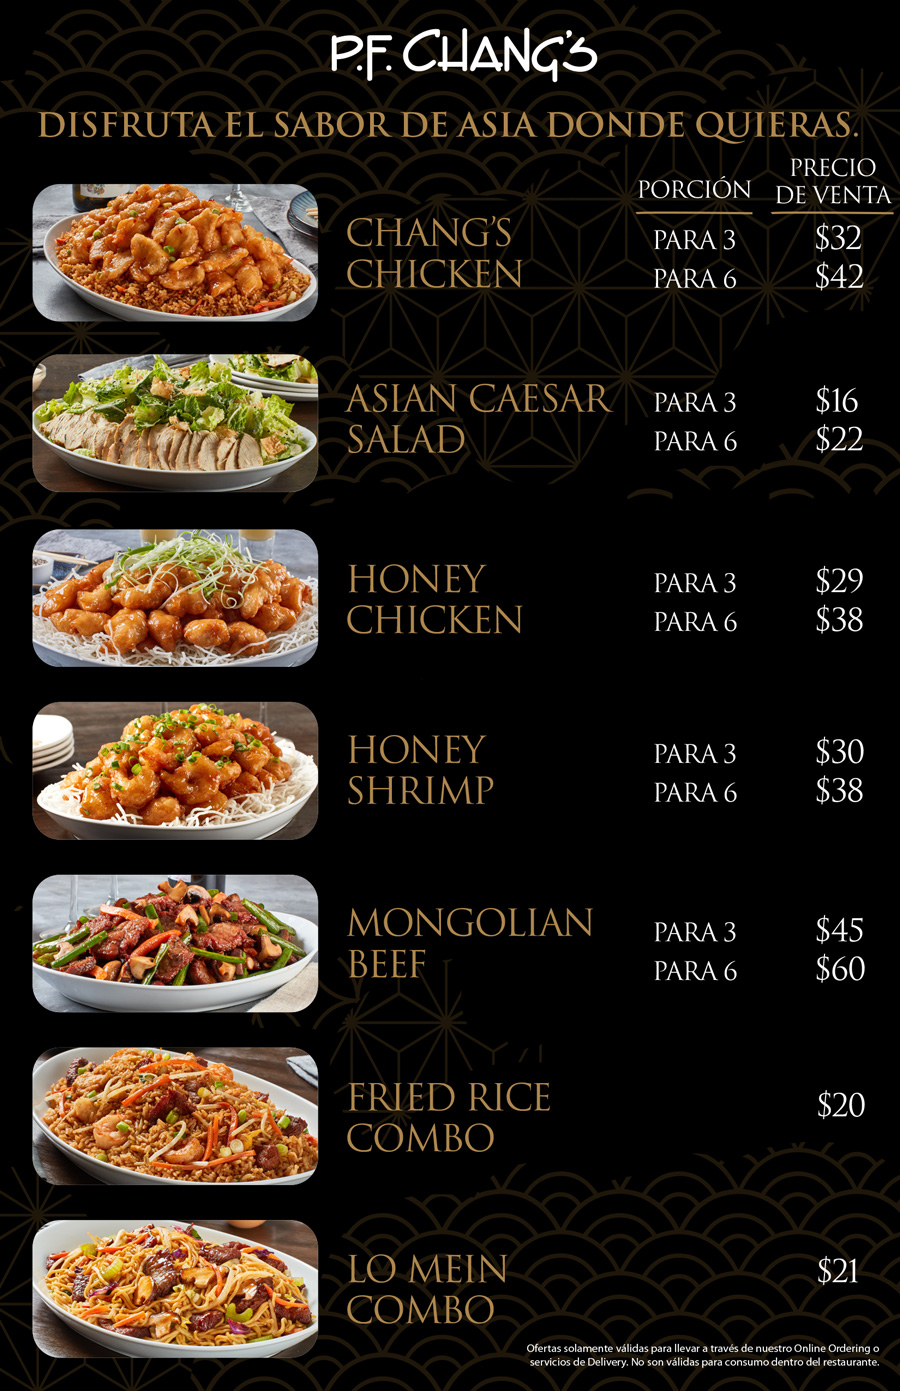 Pf Chang Menu With Pictures dusktips